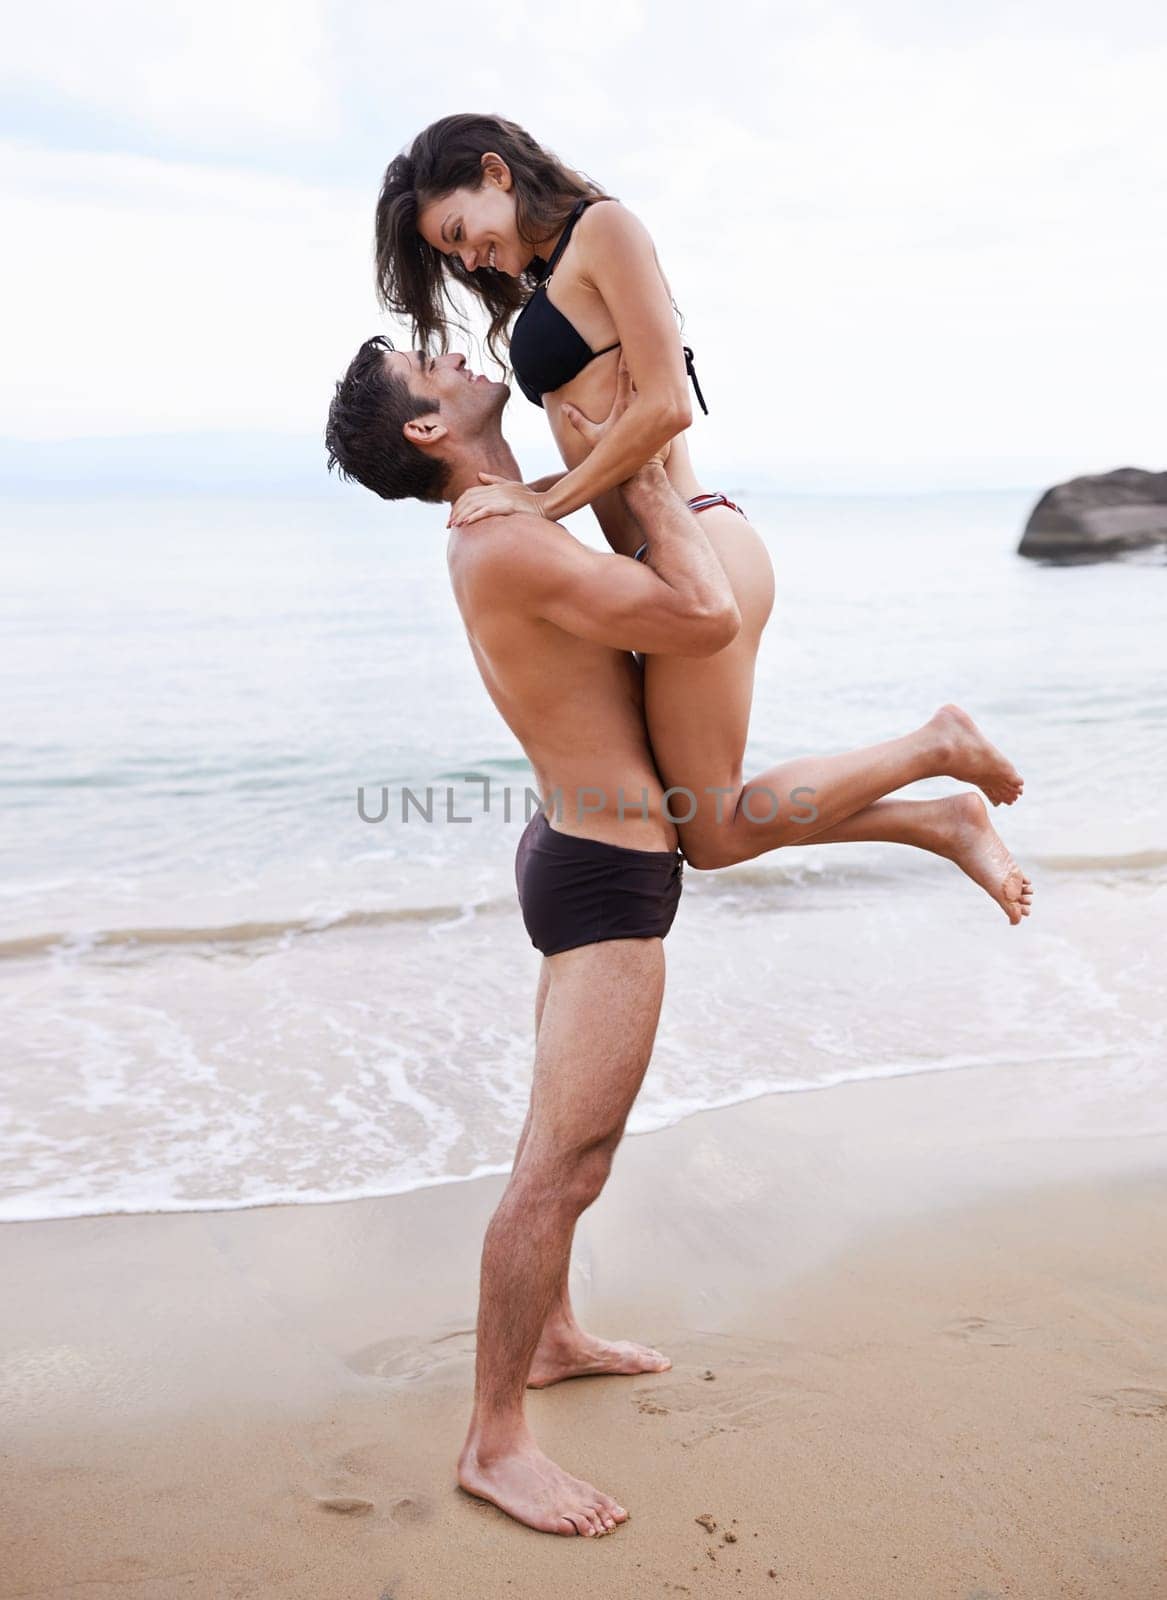 Playing, embrace and couple on beach with waves, travel adventure and relax on summer island holiday. Ocean vacation, woman and man hug in nature on date together with smile, love and romance in Bali.